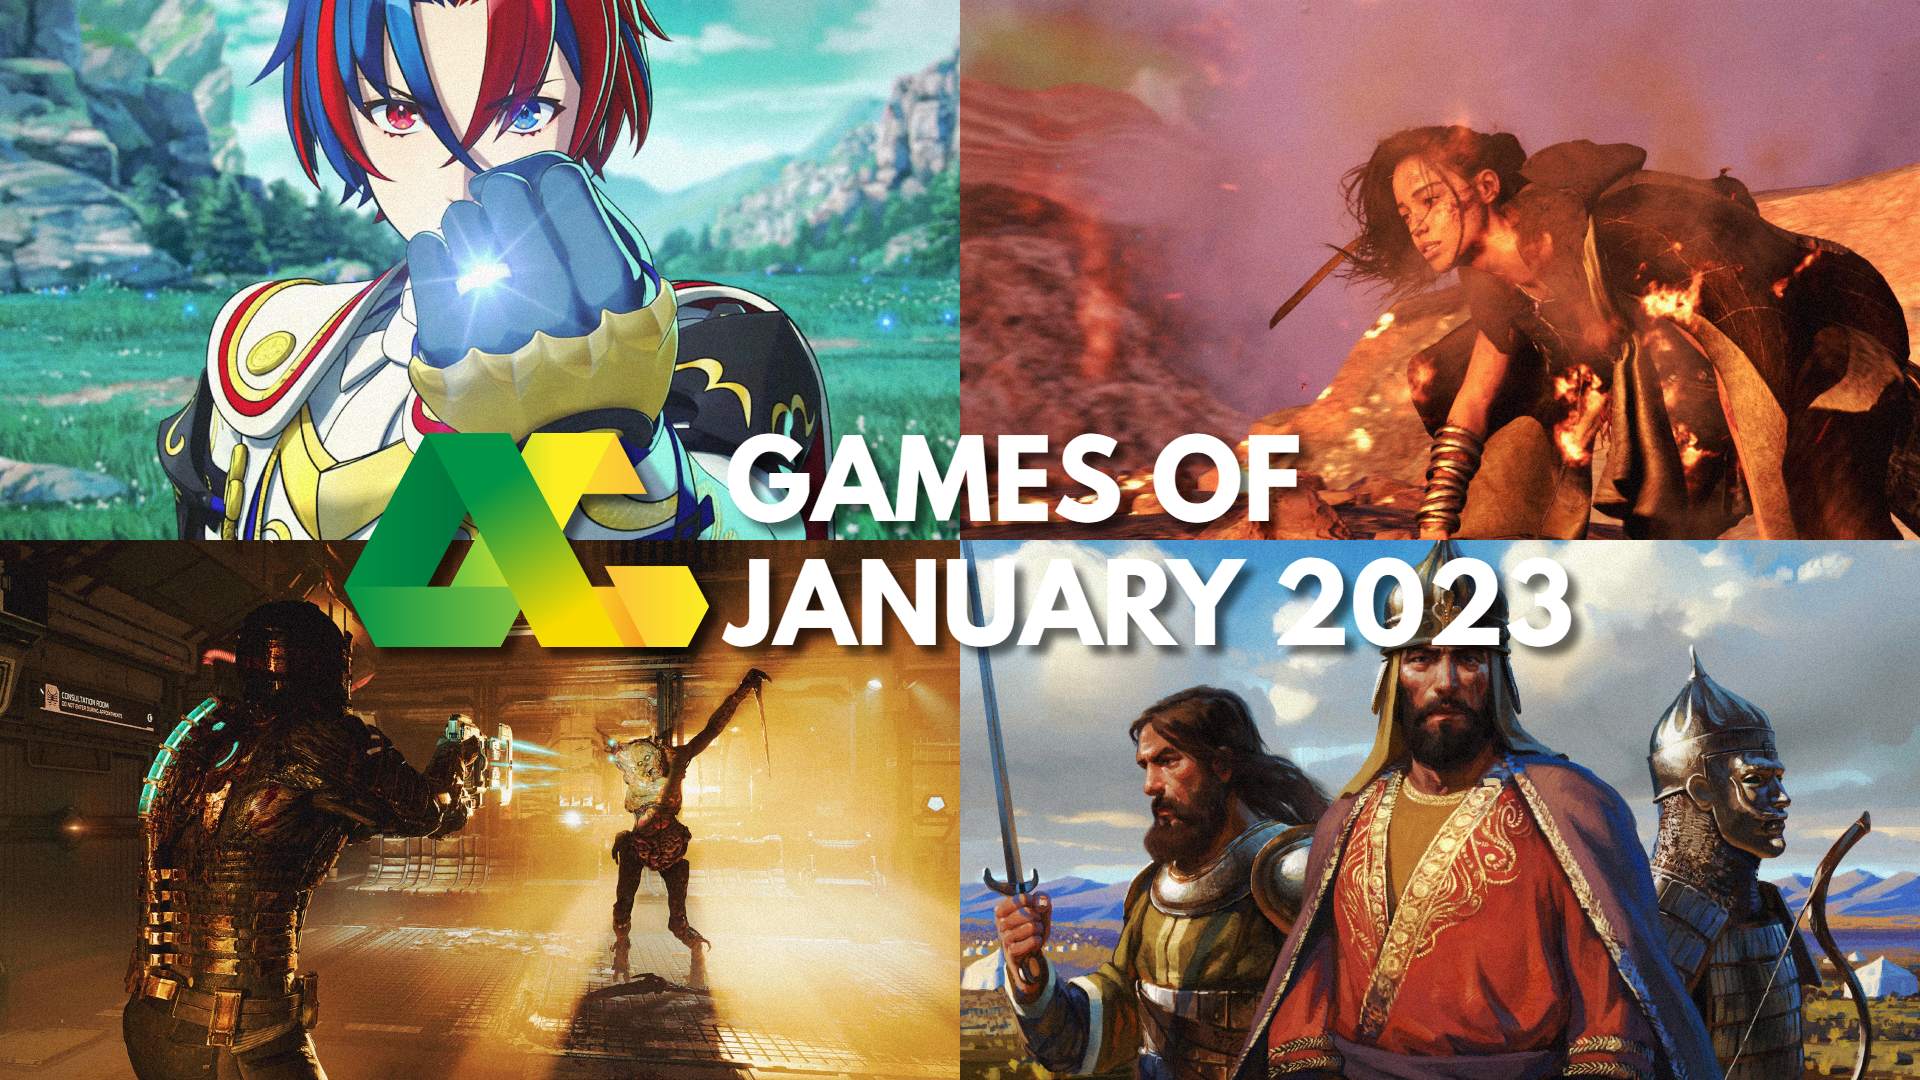 Games of January 2023 